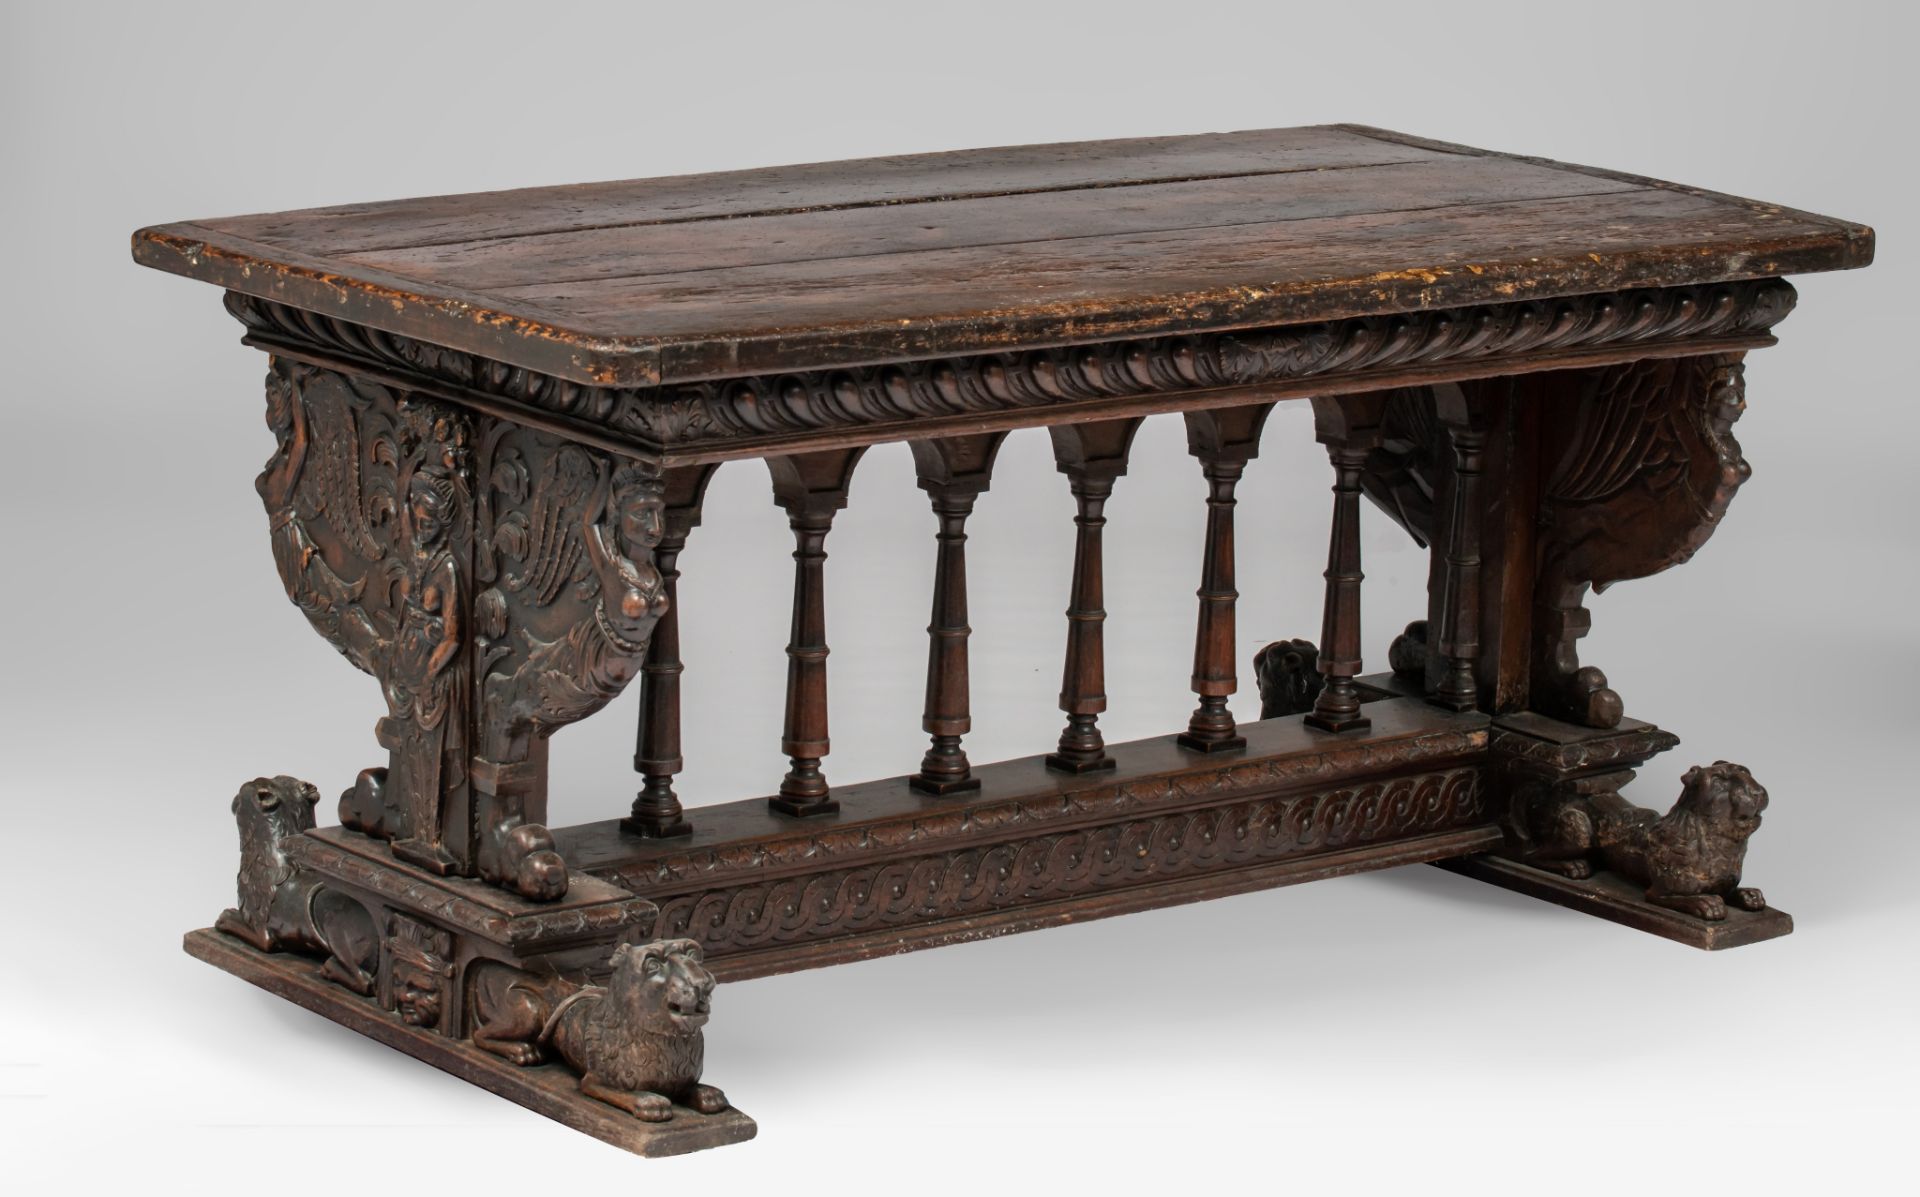 An exceptional Italian Renaissance carved walnut centre table, 16th/17thC, H 82 - W 165 - D 86,5 cm - Image 2 of 12